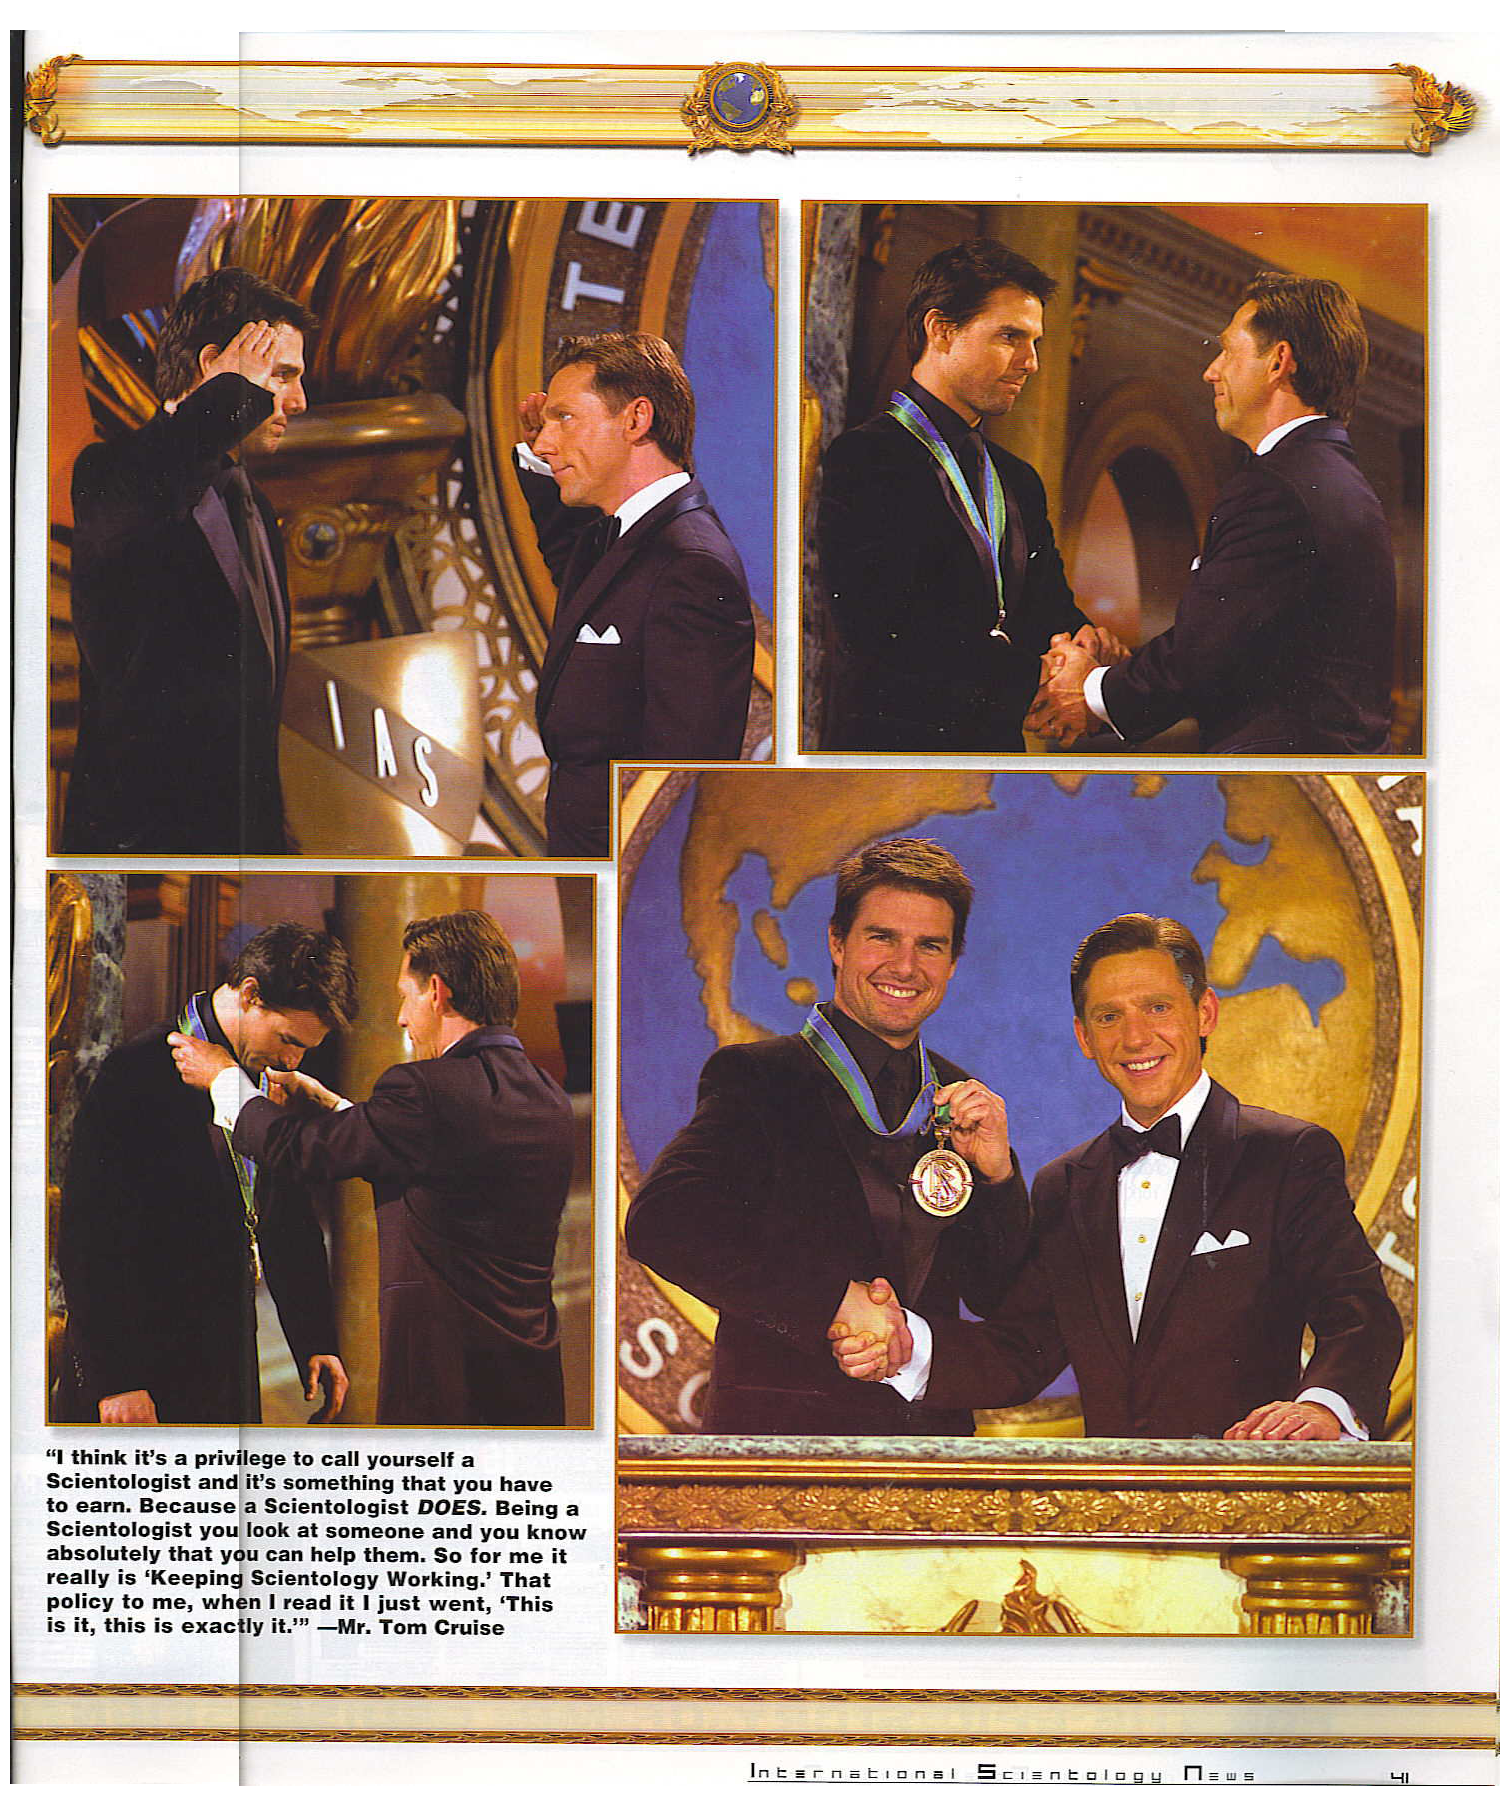 Tom Cruise and His “Freedom Medal of Valour” | Scientology Books and Media